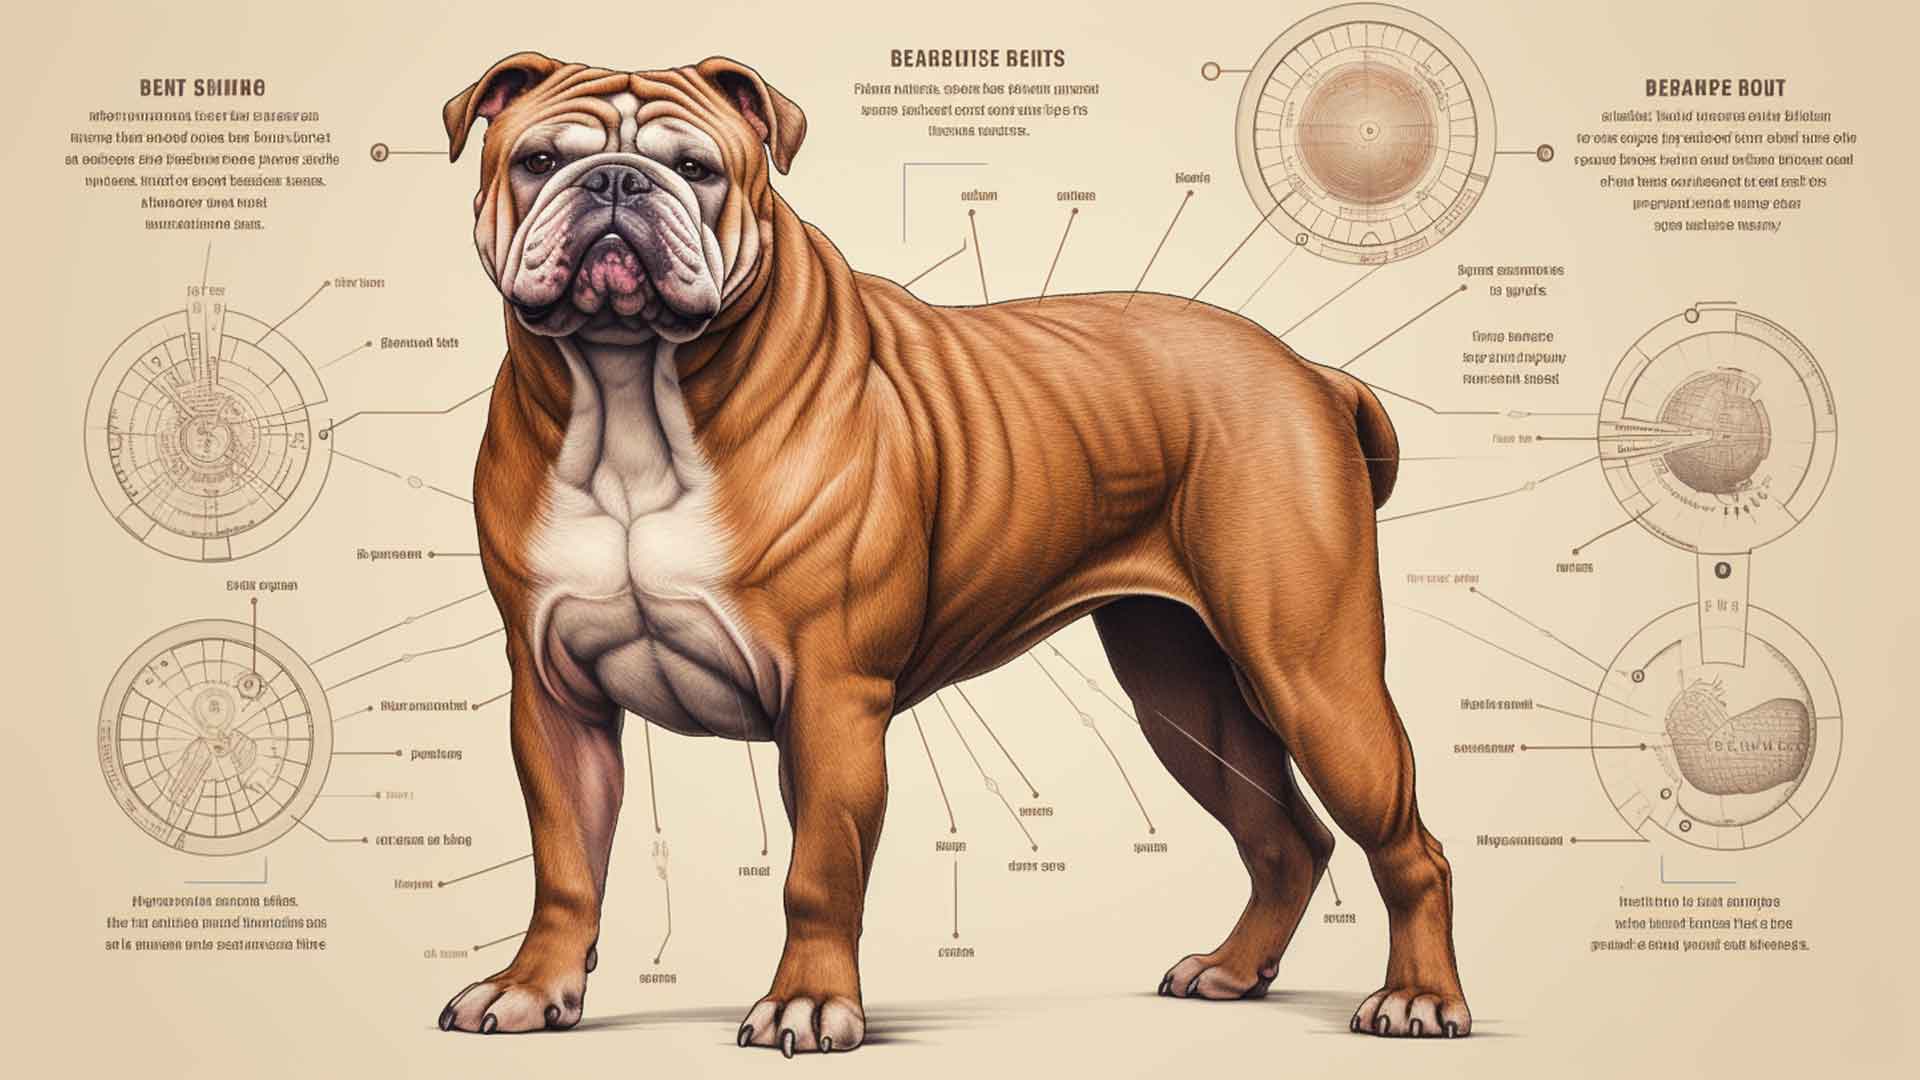 Portrait of a Micro Bully dog looking directly at the camera, showcasing its unique facial features and muscular physique, symbolizing the primary focus of the article on its physical attributes and traits.